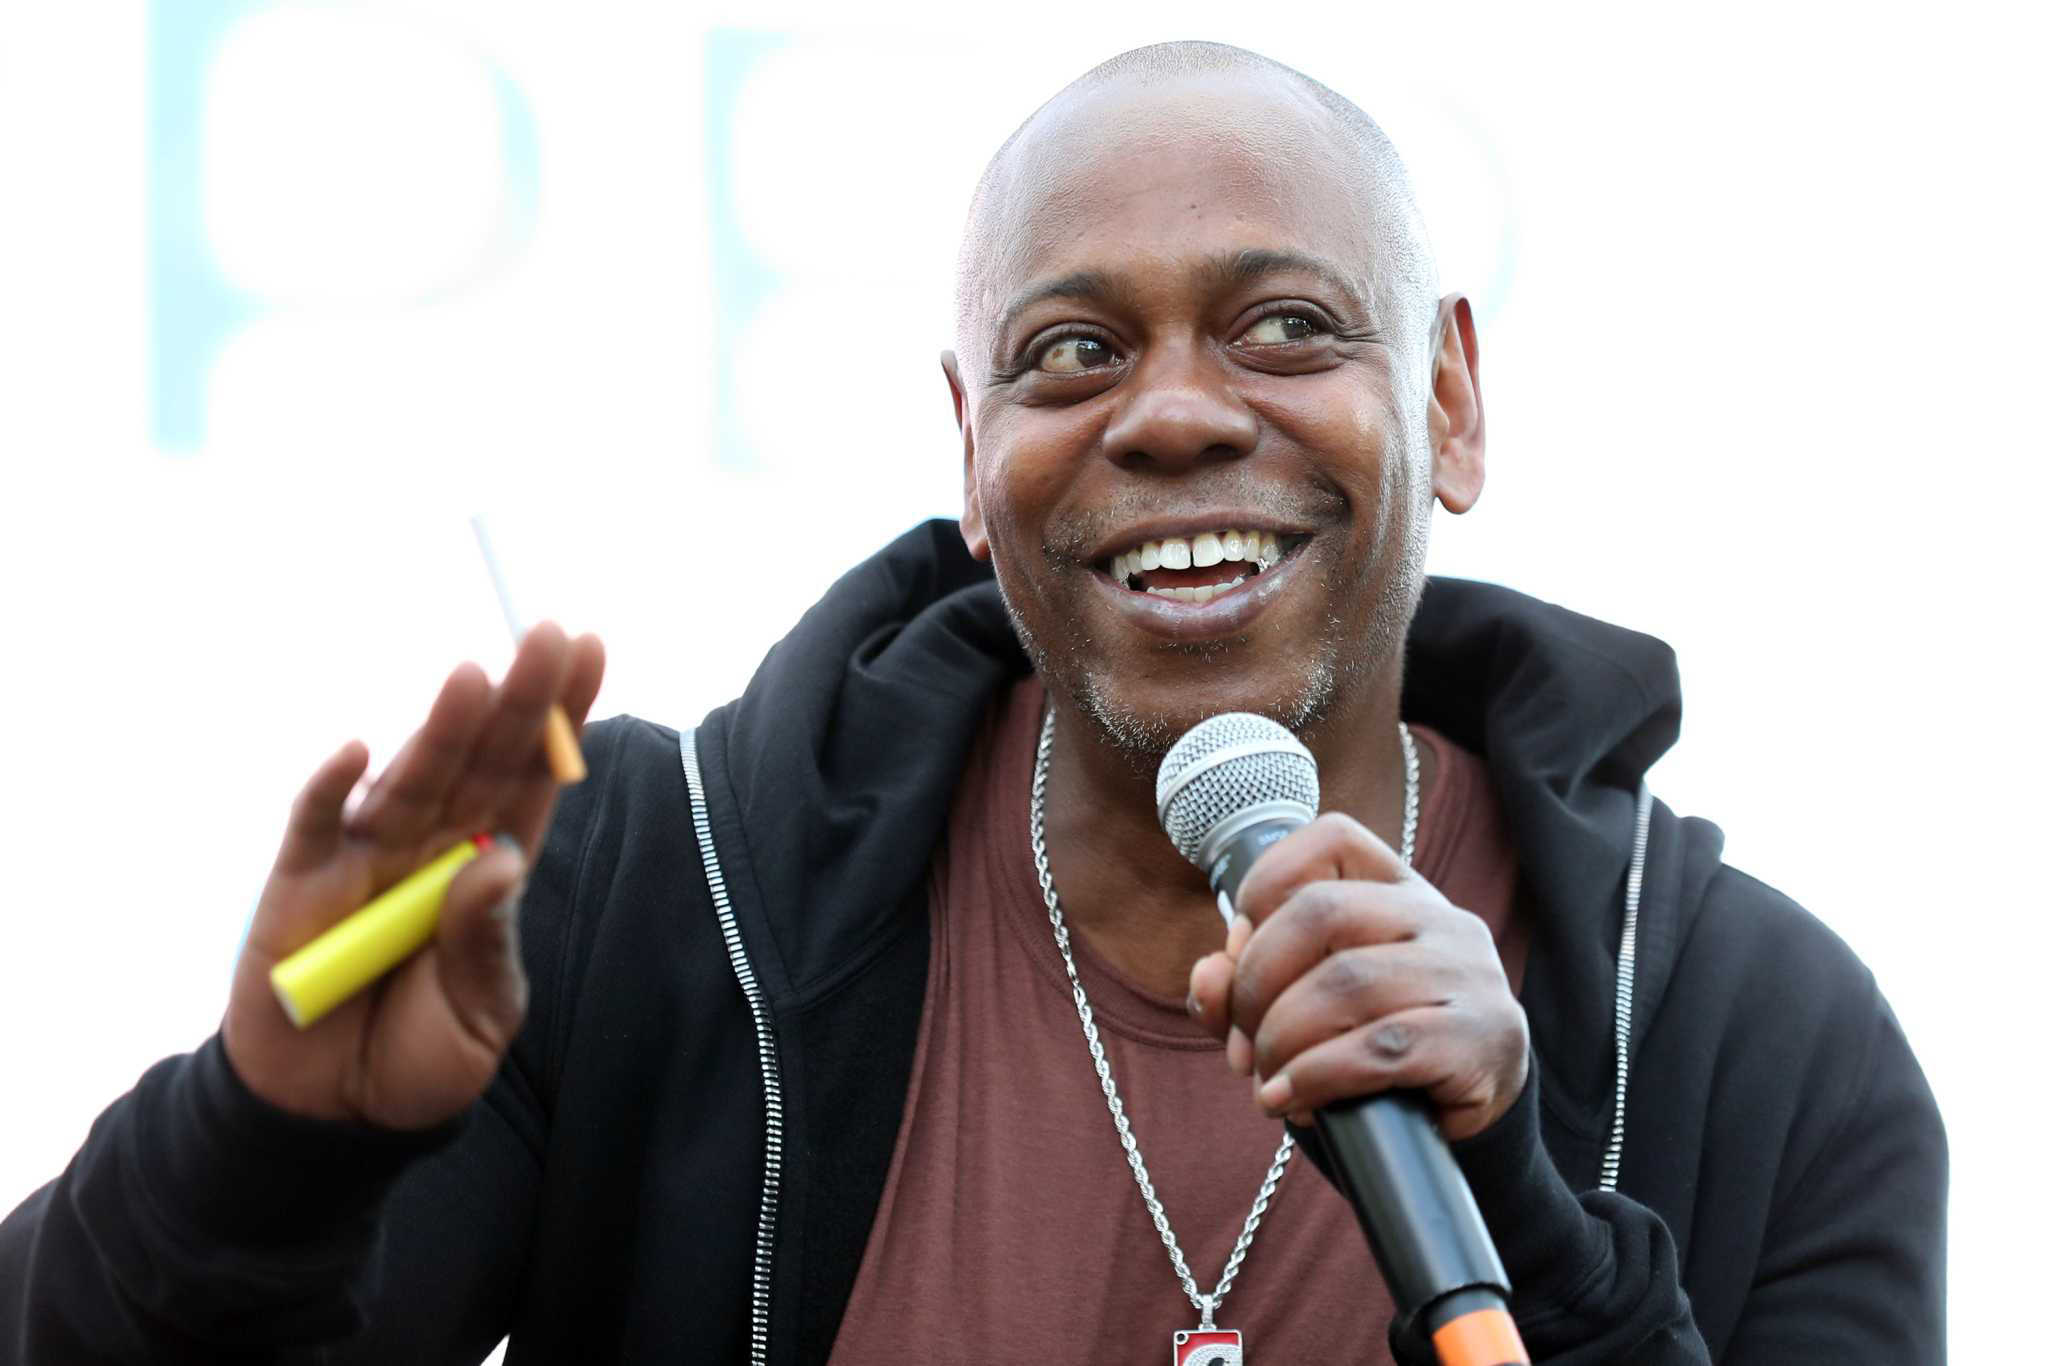 Dave Chappelle to hit the stage in San Francisco ahead of Blue Note